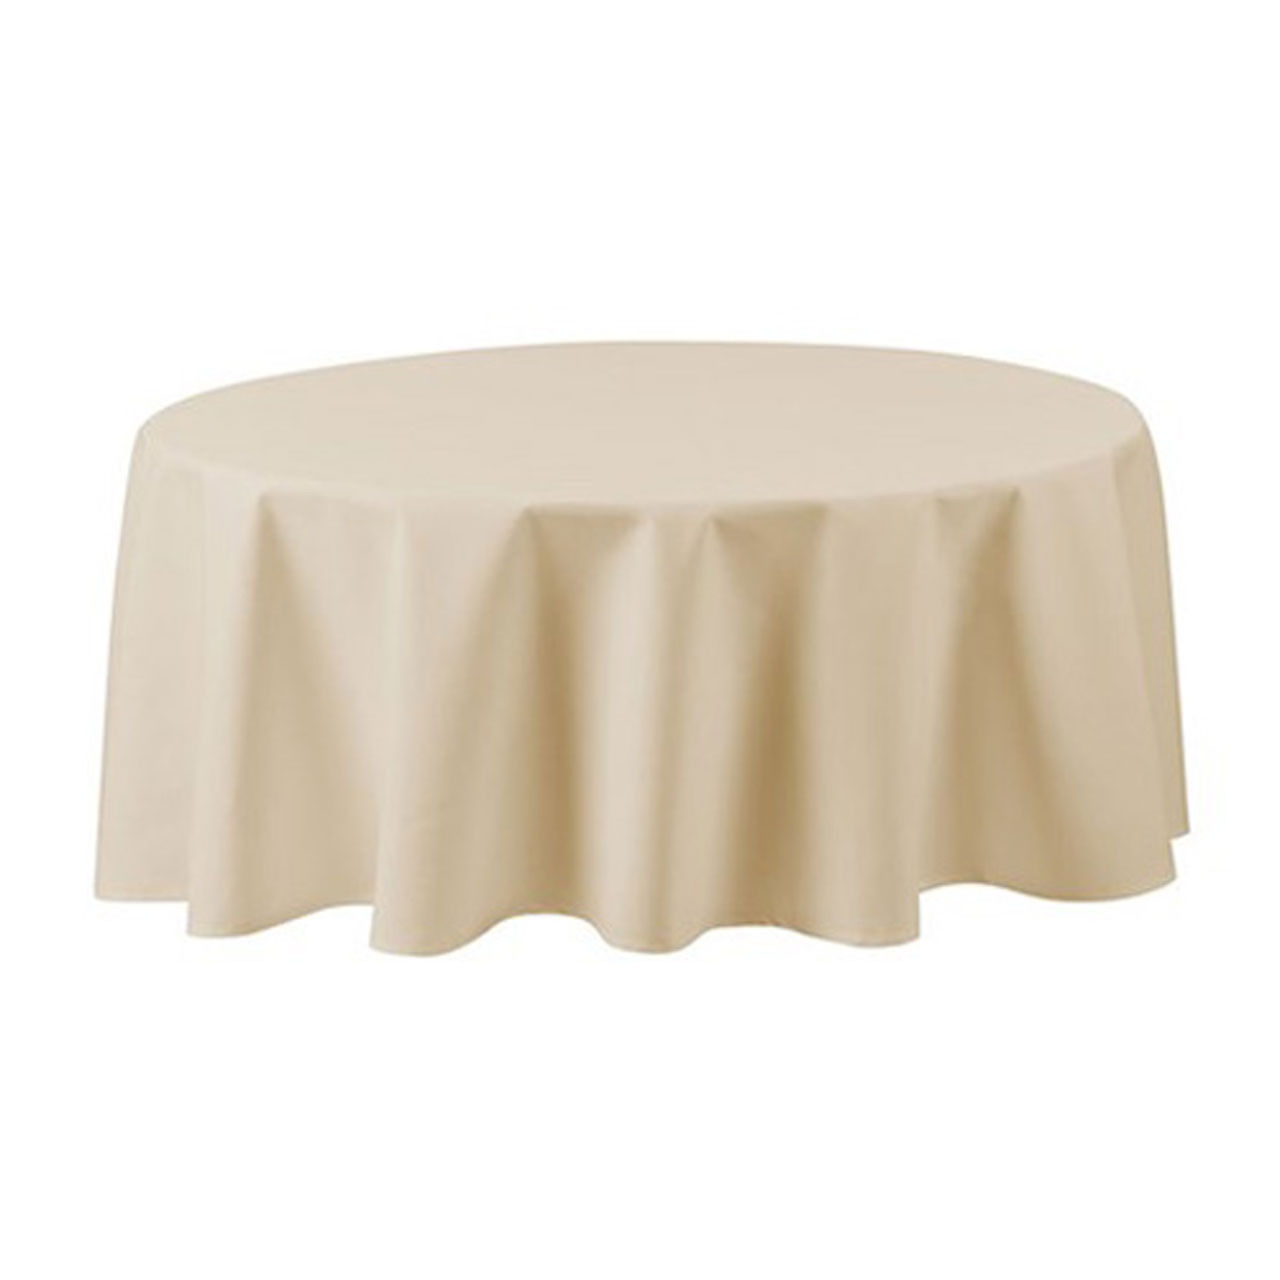 How many inches should a tablecloth hang over the table?